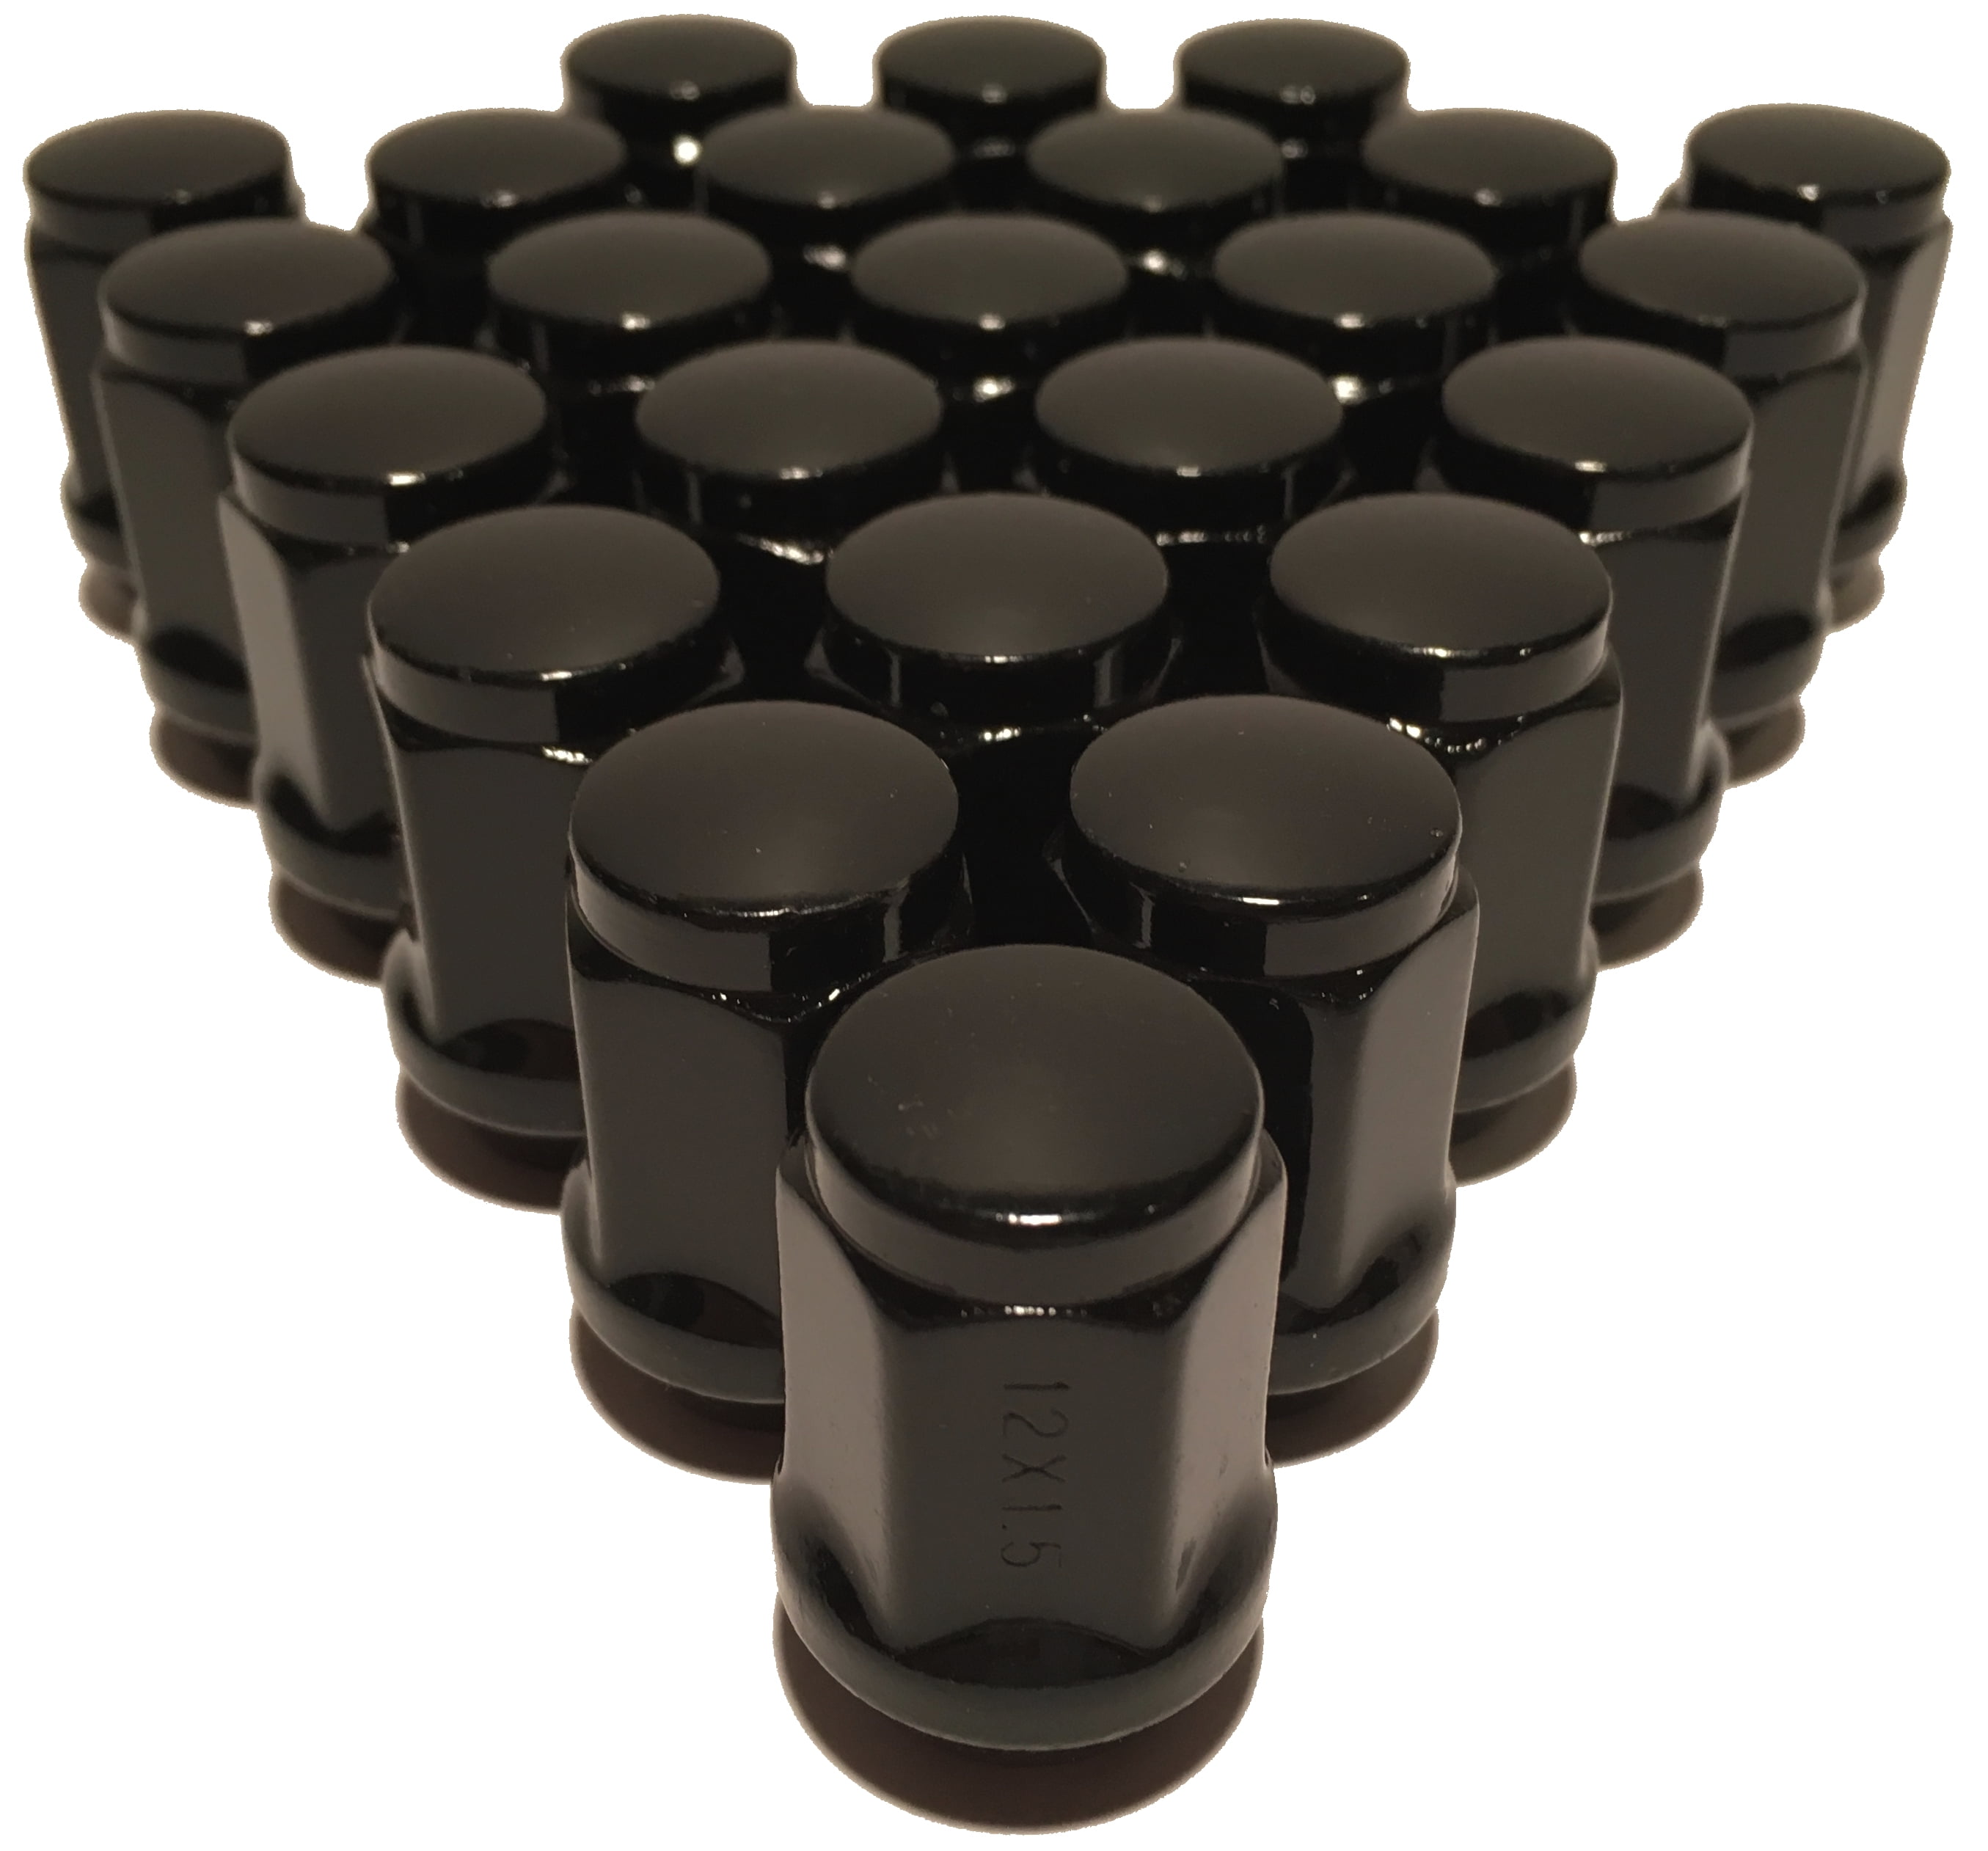 3/4 19mm Hex 1.8 inch Length Compatible with Various Chevy Chevrolet GMC Ford 8-Lug Trucks SUVs Vehicles Cone Acorn Seat StanceMagic 32pcs Black 14x1.5 Bulge Closed End Lug Nuts 